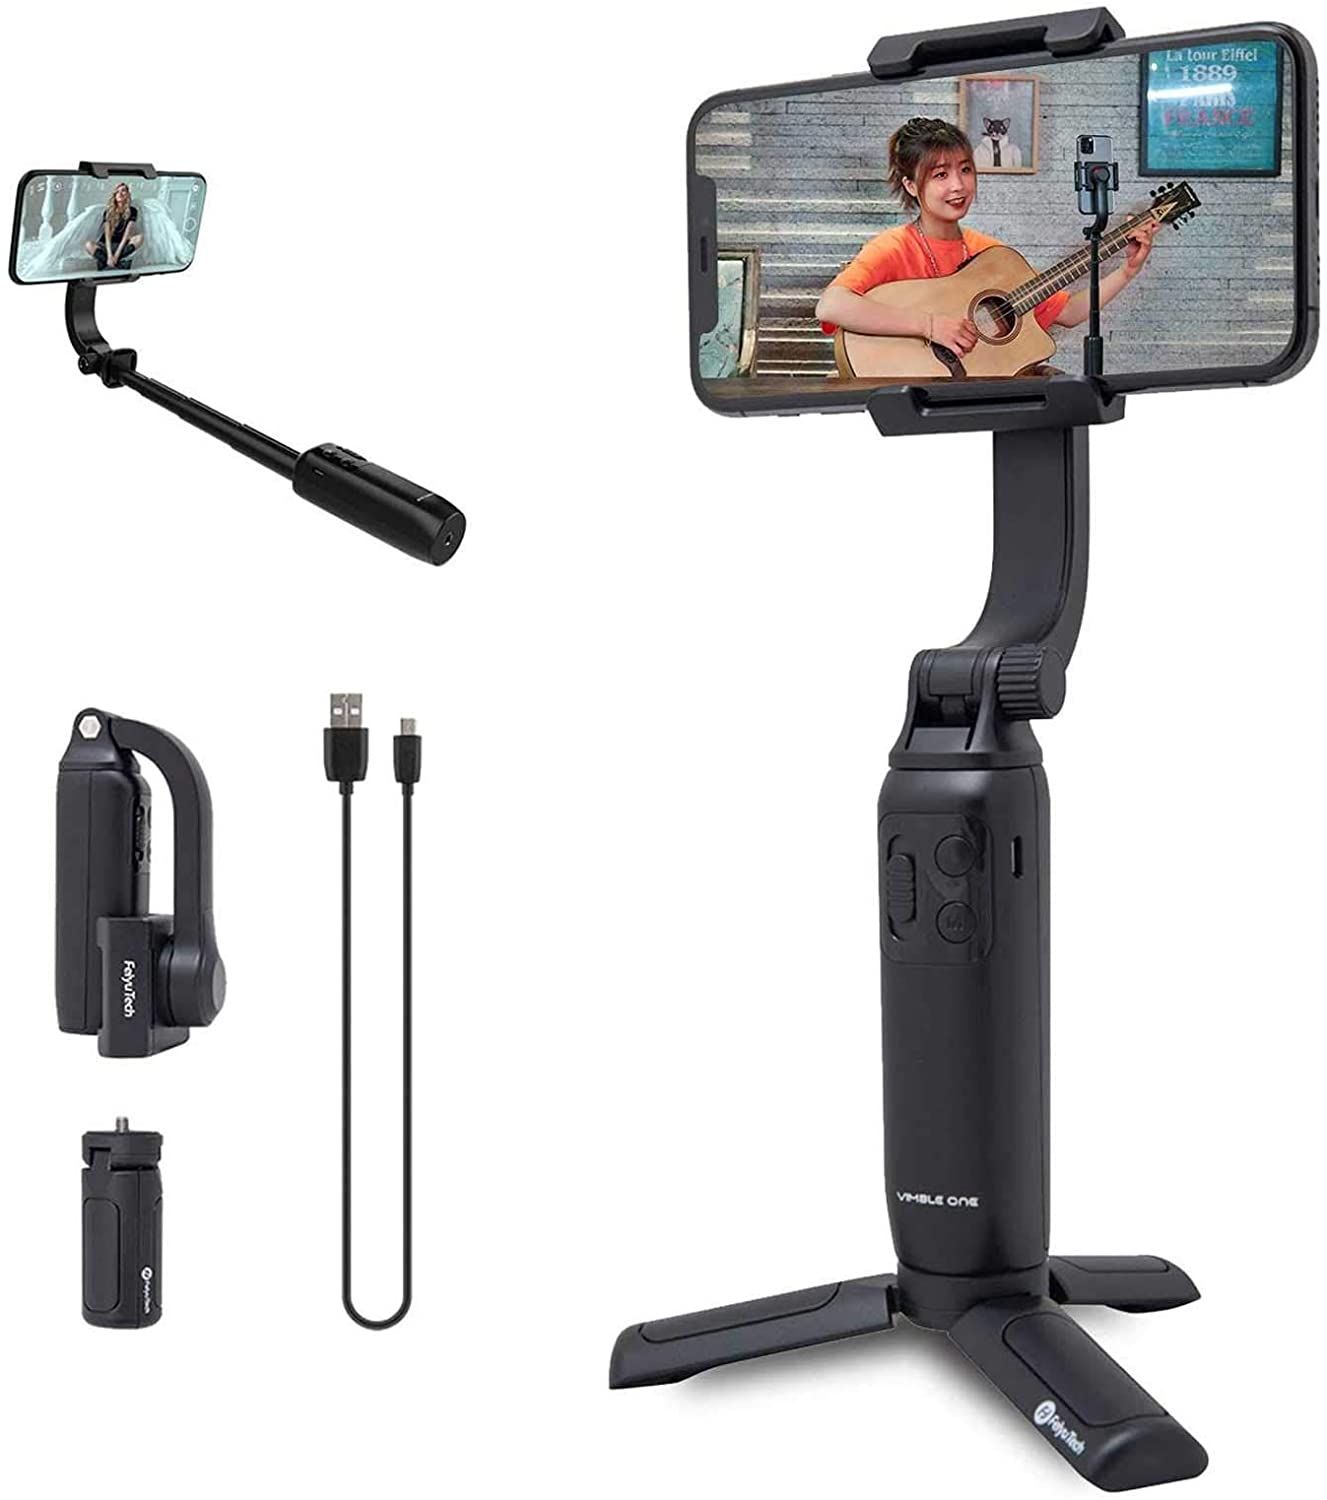 Gimbal Stabilizer for Phone APP Selfie Stick Tripod Stabilizer Handheld Tripod Stand Holder for Smartphone Iphone,For Vlog Video Photography Youtube TIK Tok Live Stream